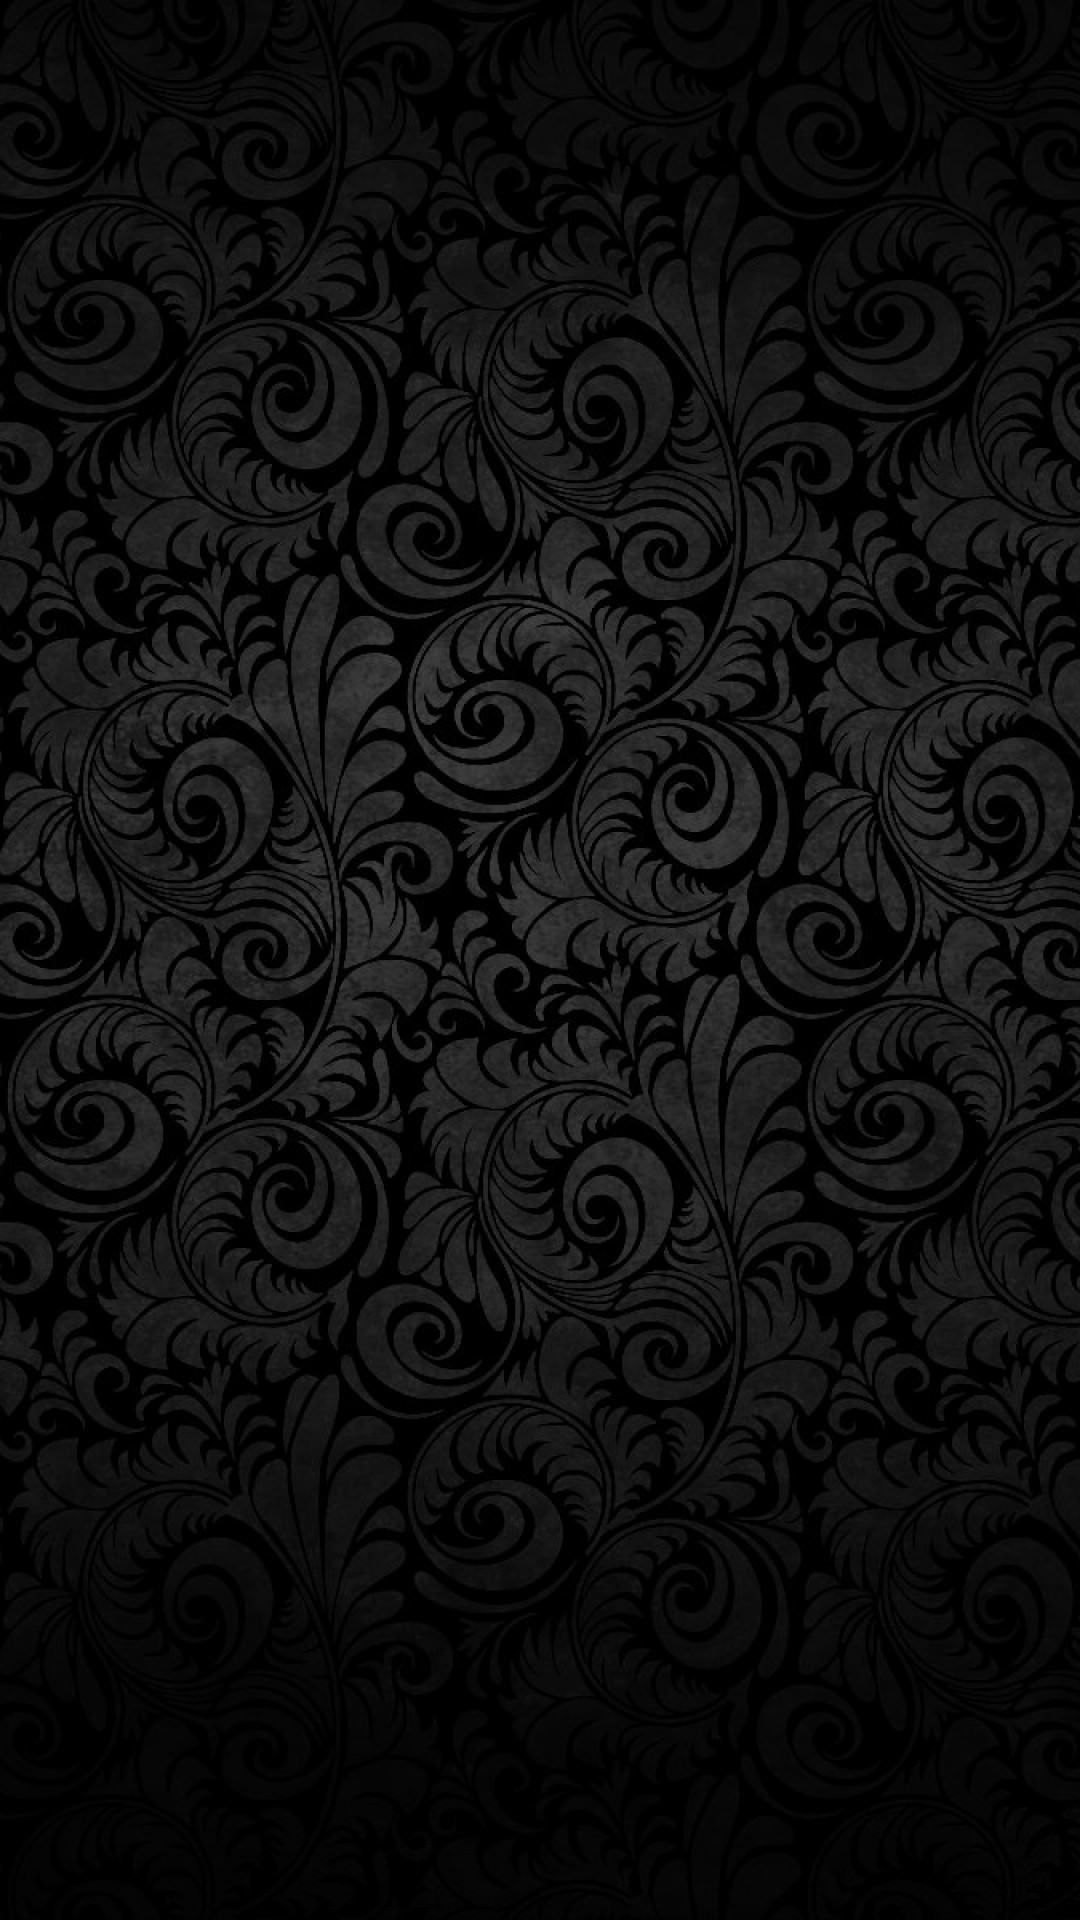 Free Abstract Dark Shapes Mobile Wallpaper template